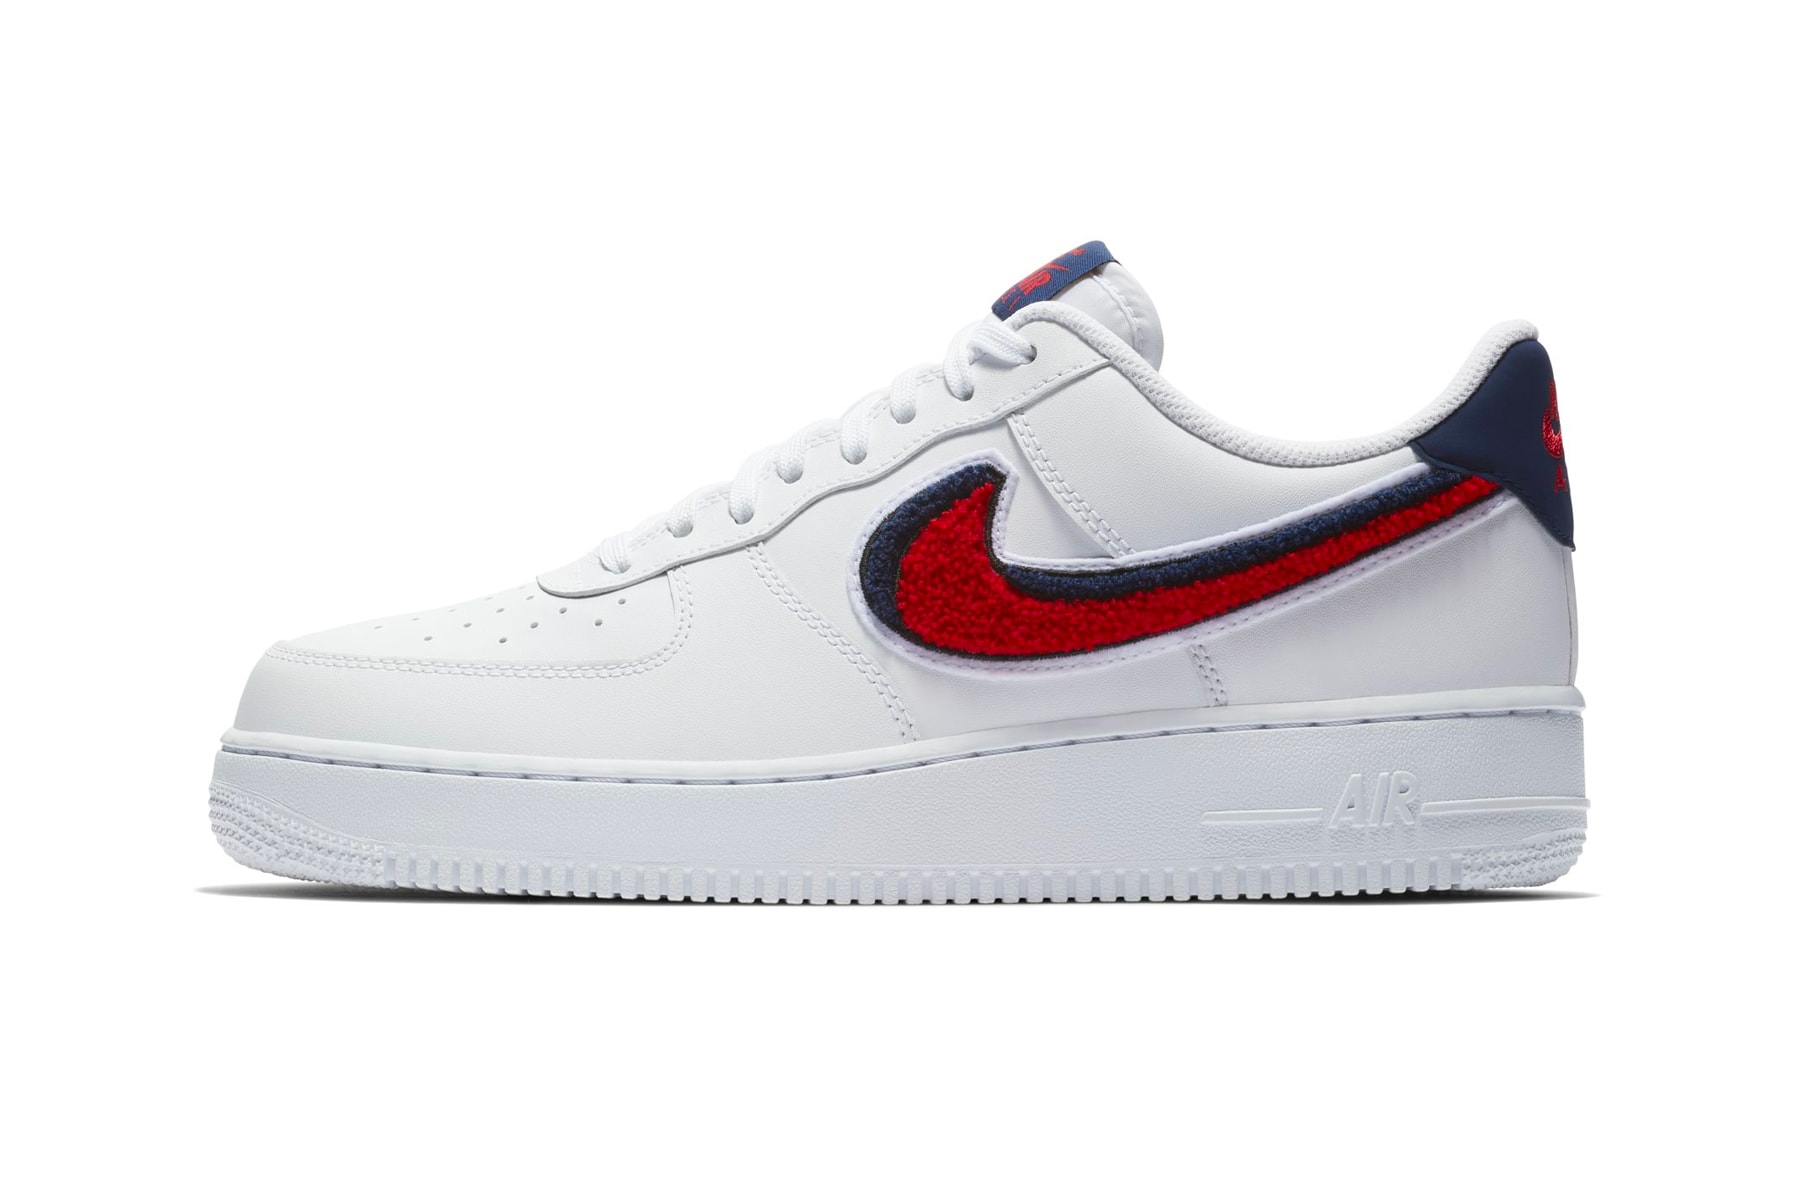 Nike Air Force 1 '07 LV8 Chenille Swoosh Release Date